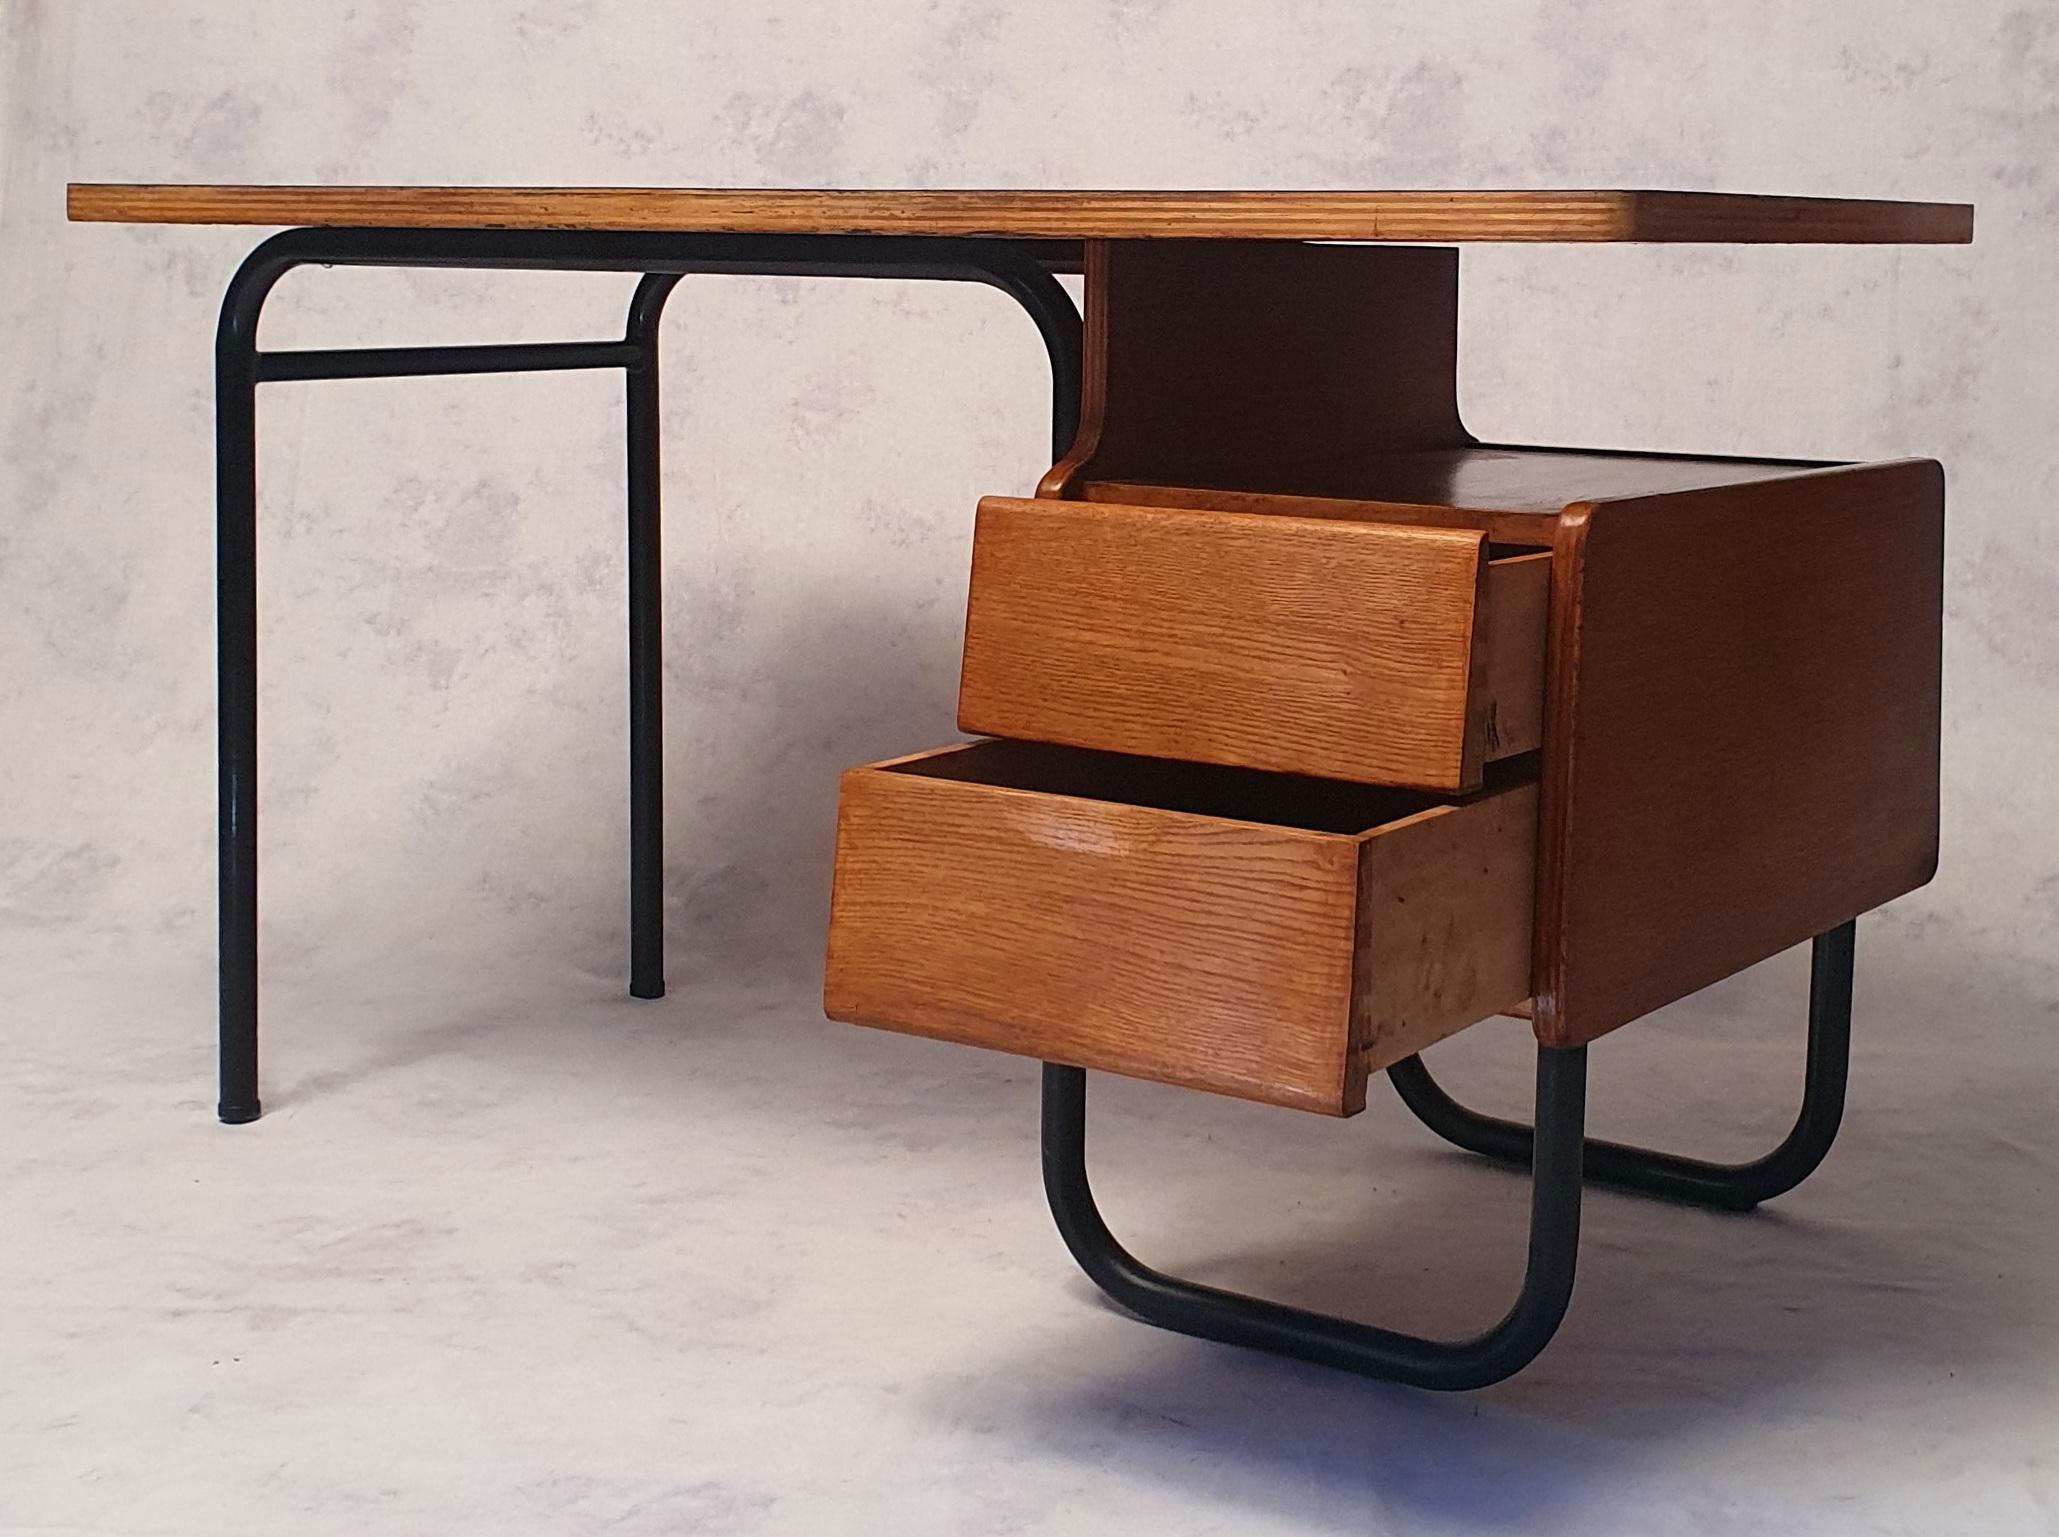 Modernist desk by French designer Robert Charroy produced by Mobilor in the mid-1950s (1955-1956). This series of furniture was chosen to equip the Jean Zay university residence in the town of Antony. This residence was equipped with furniture